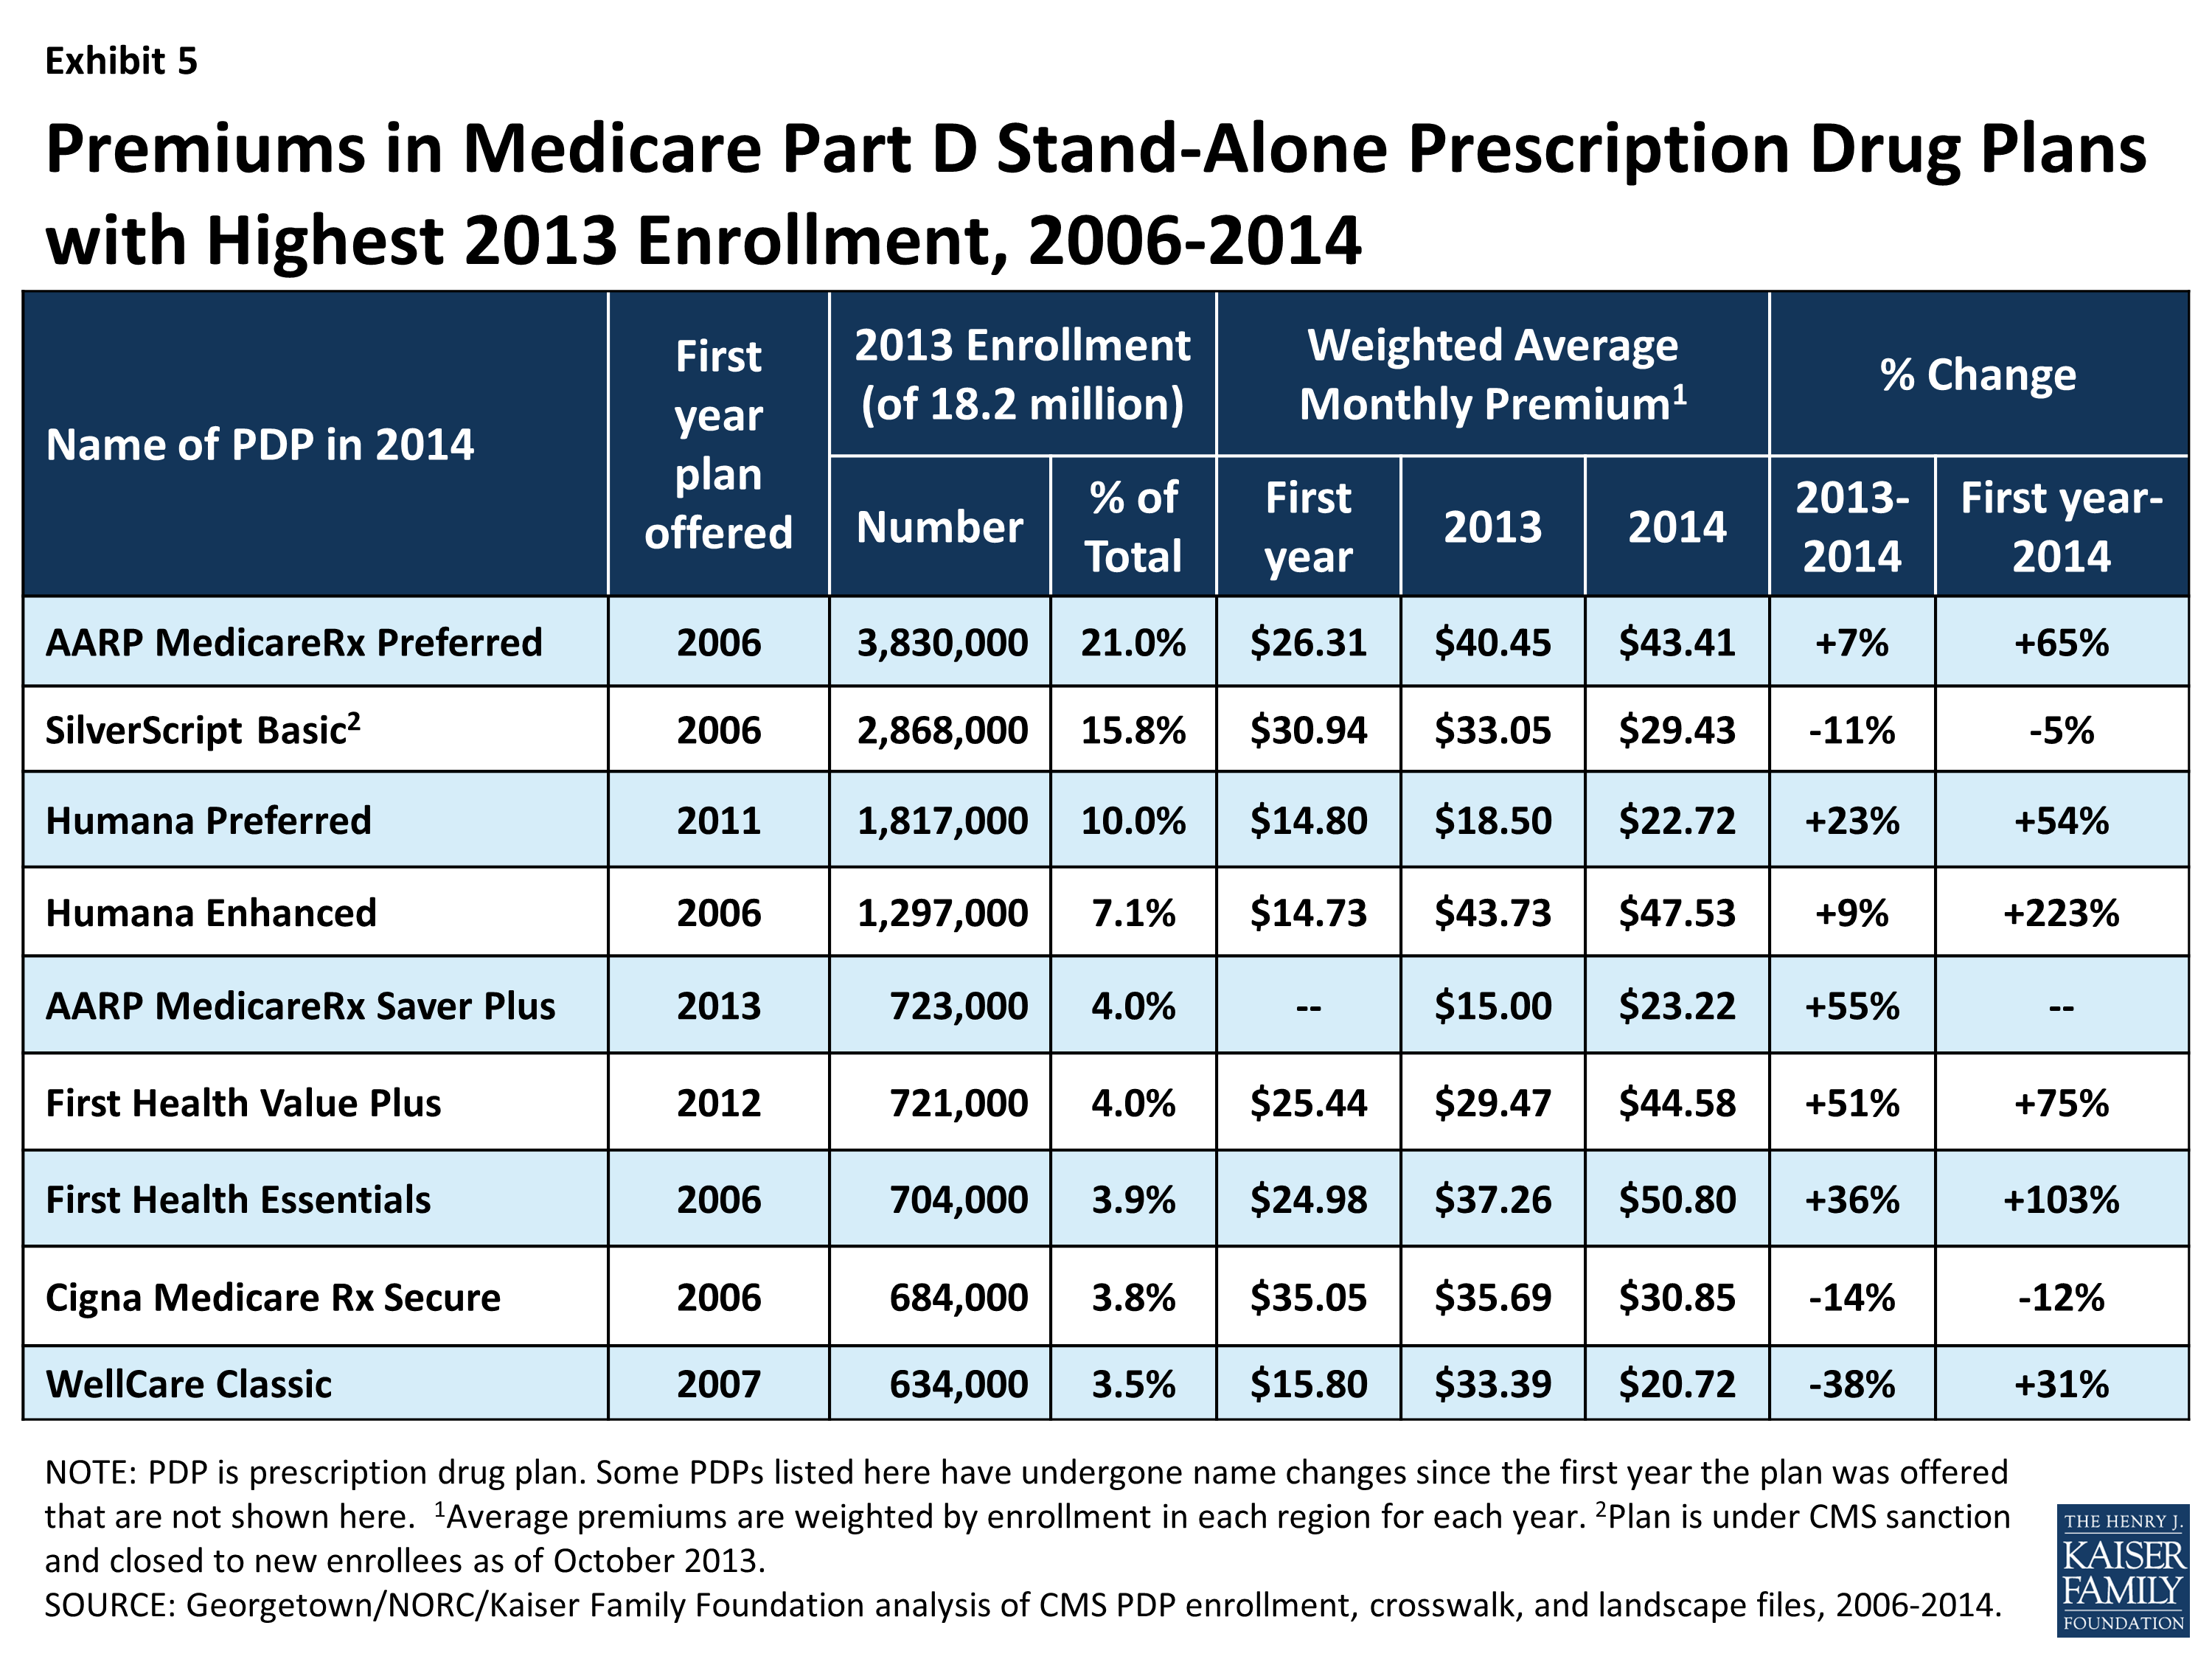 Medicare Part D: A First Look at Plan Offerings in 2014